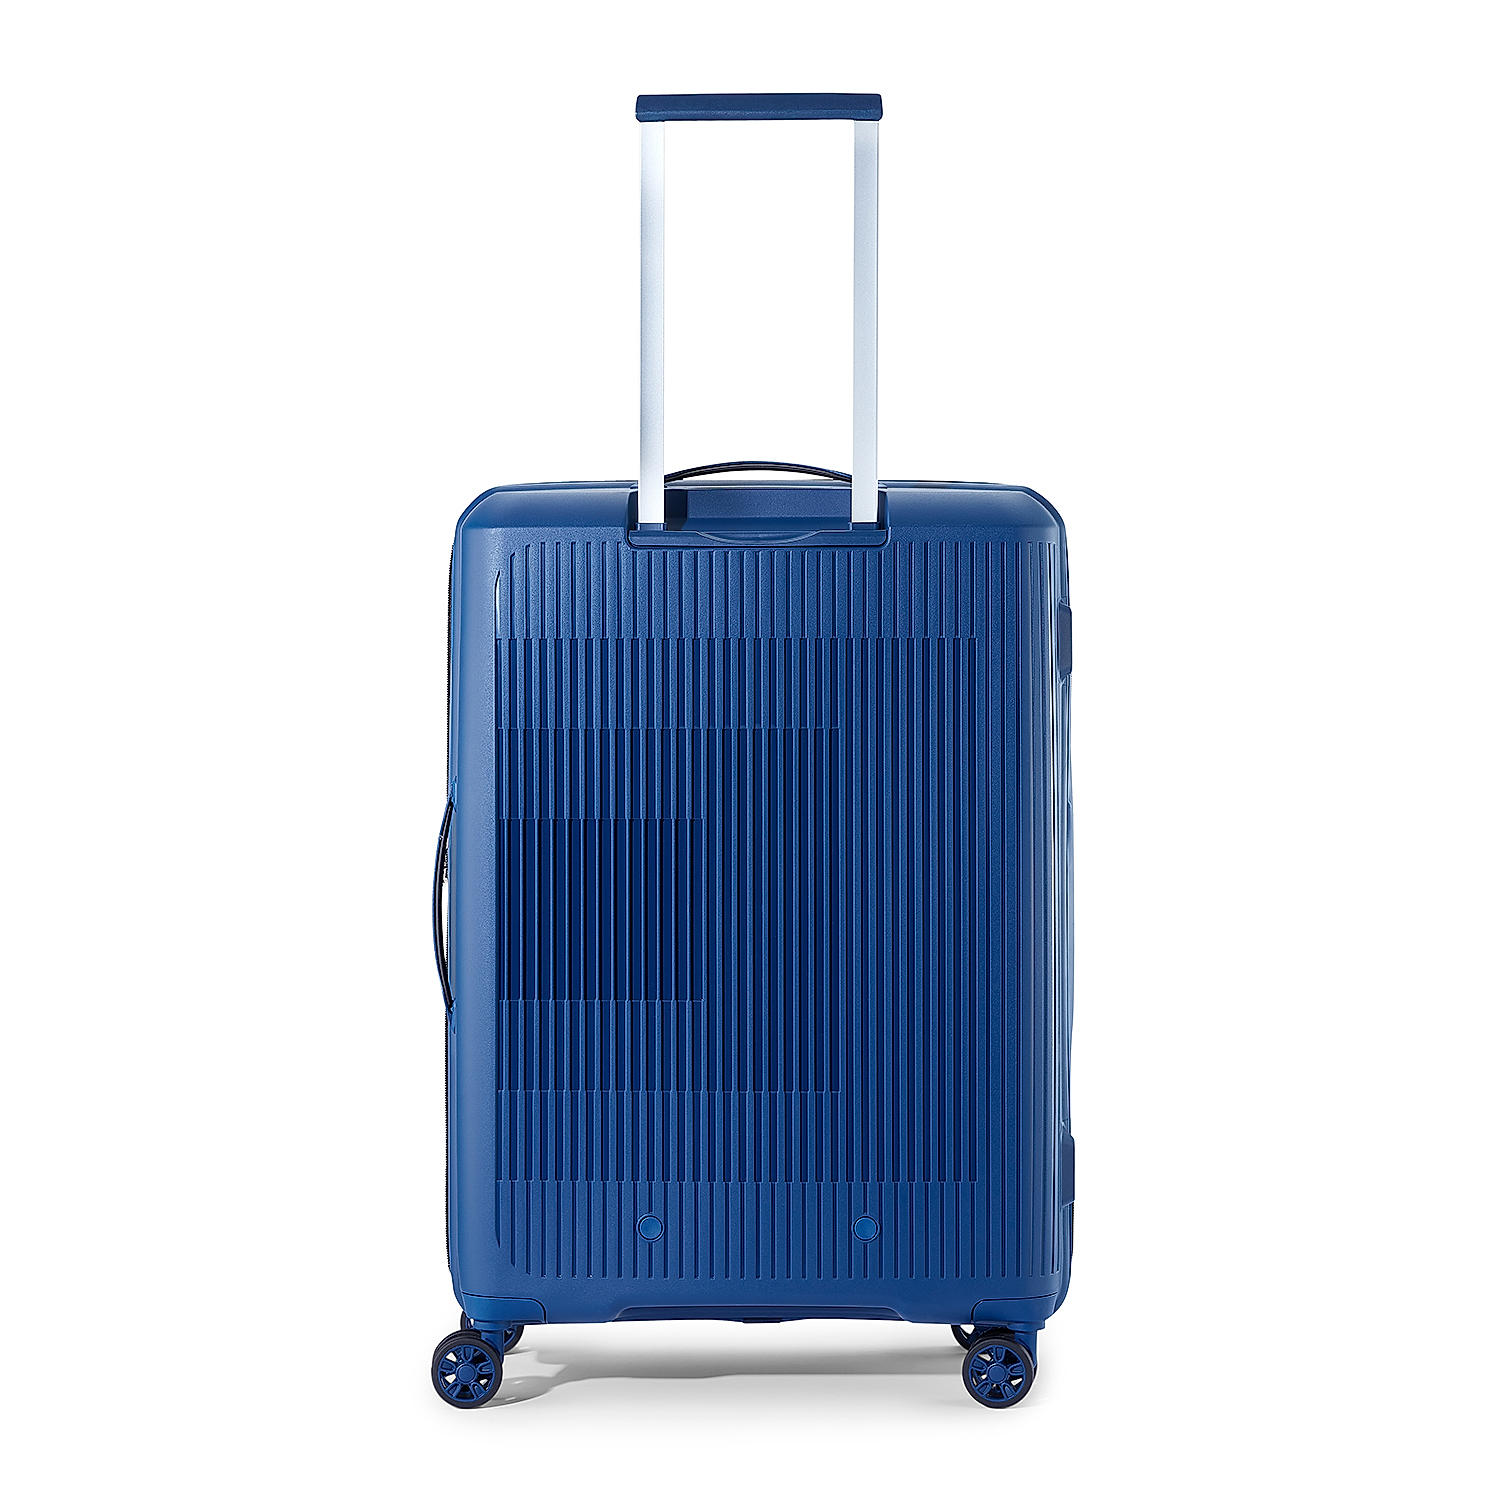 Pack for Stories with AeroStep - American Tourister 